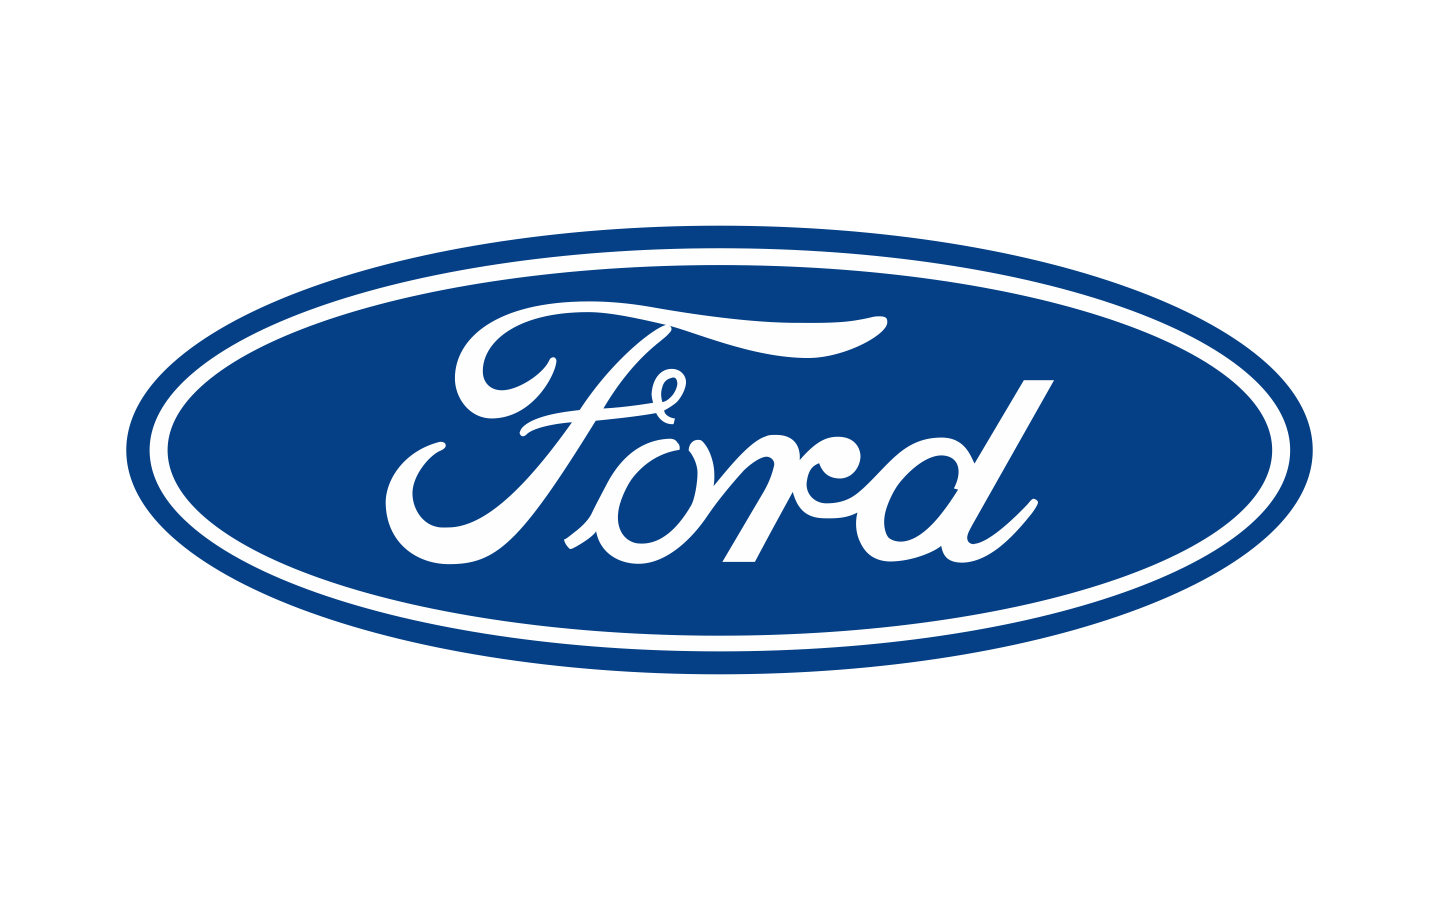 How did Ford become what they are today?